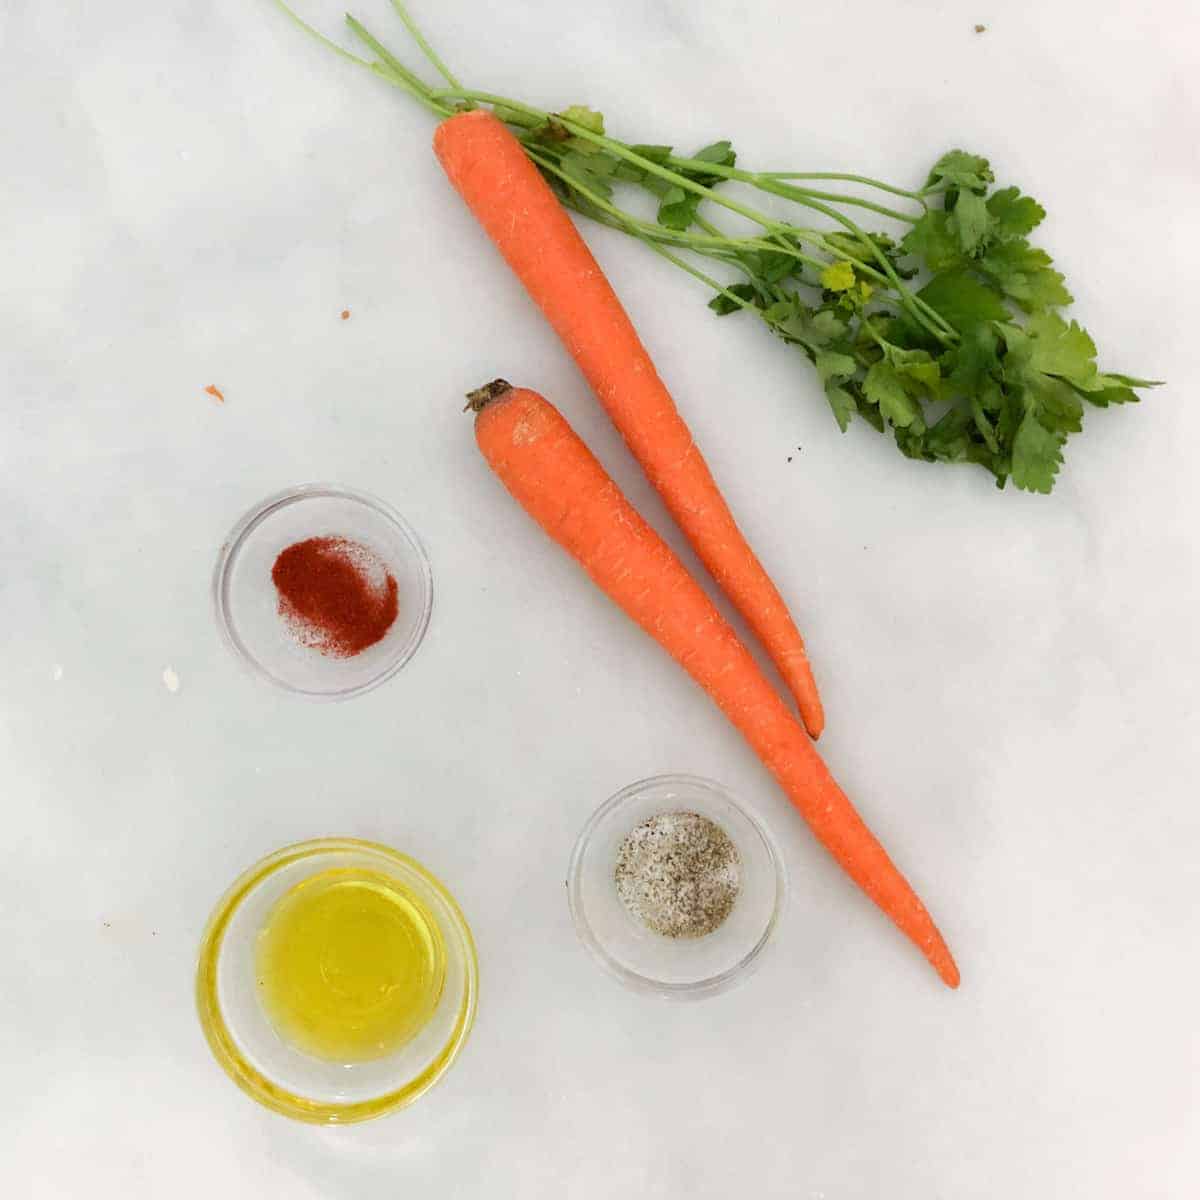 Carrots, seasoning and olive oil on countertop.